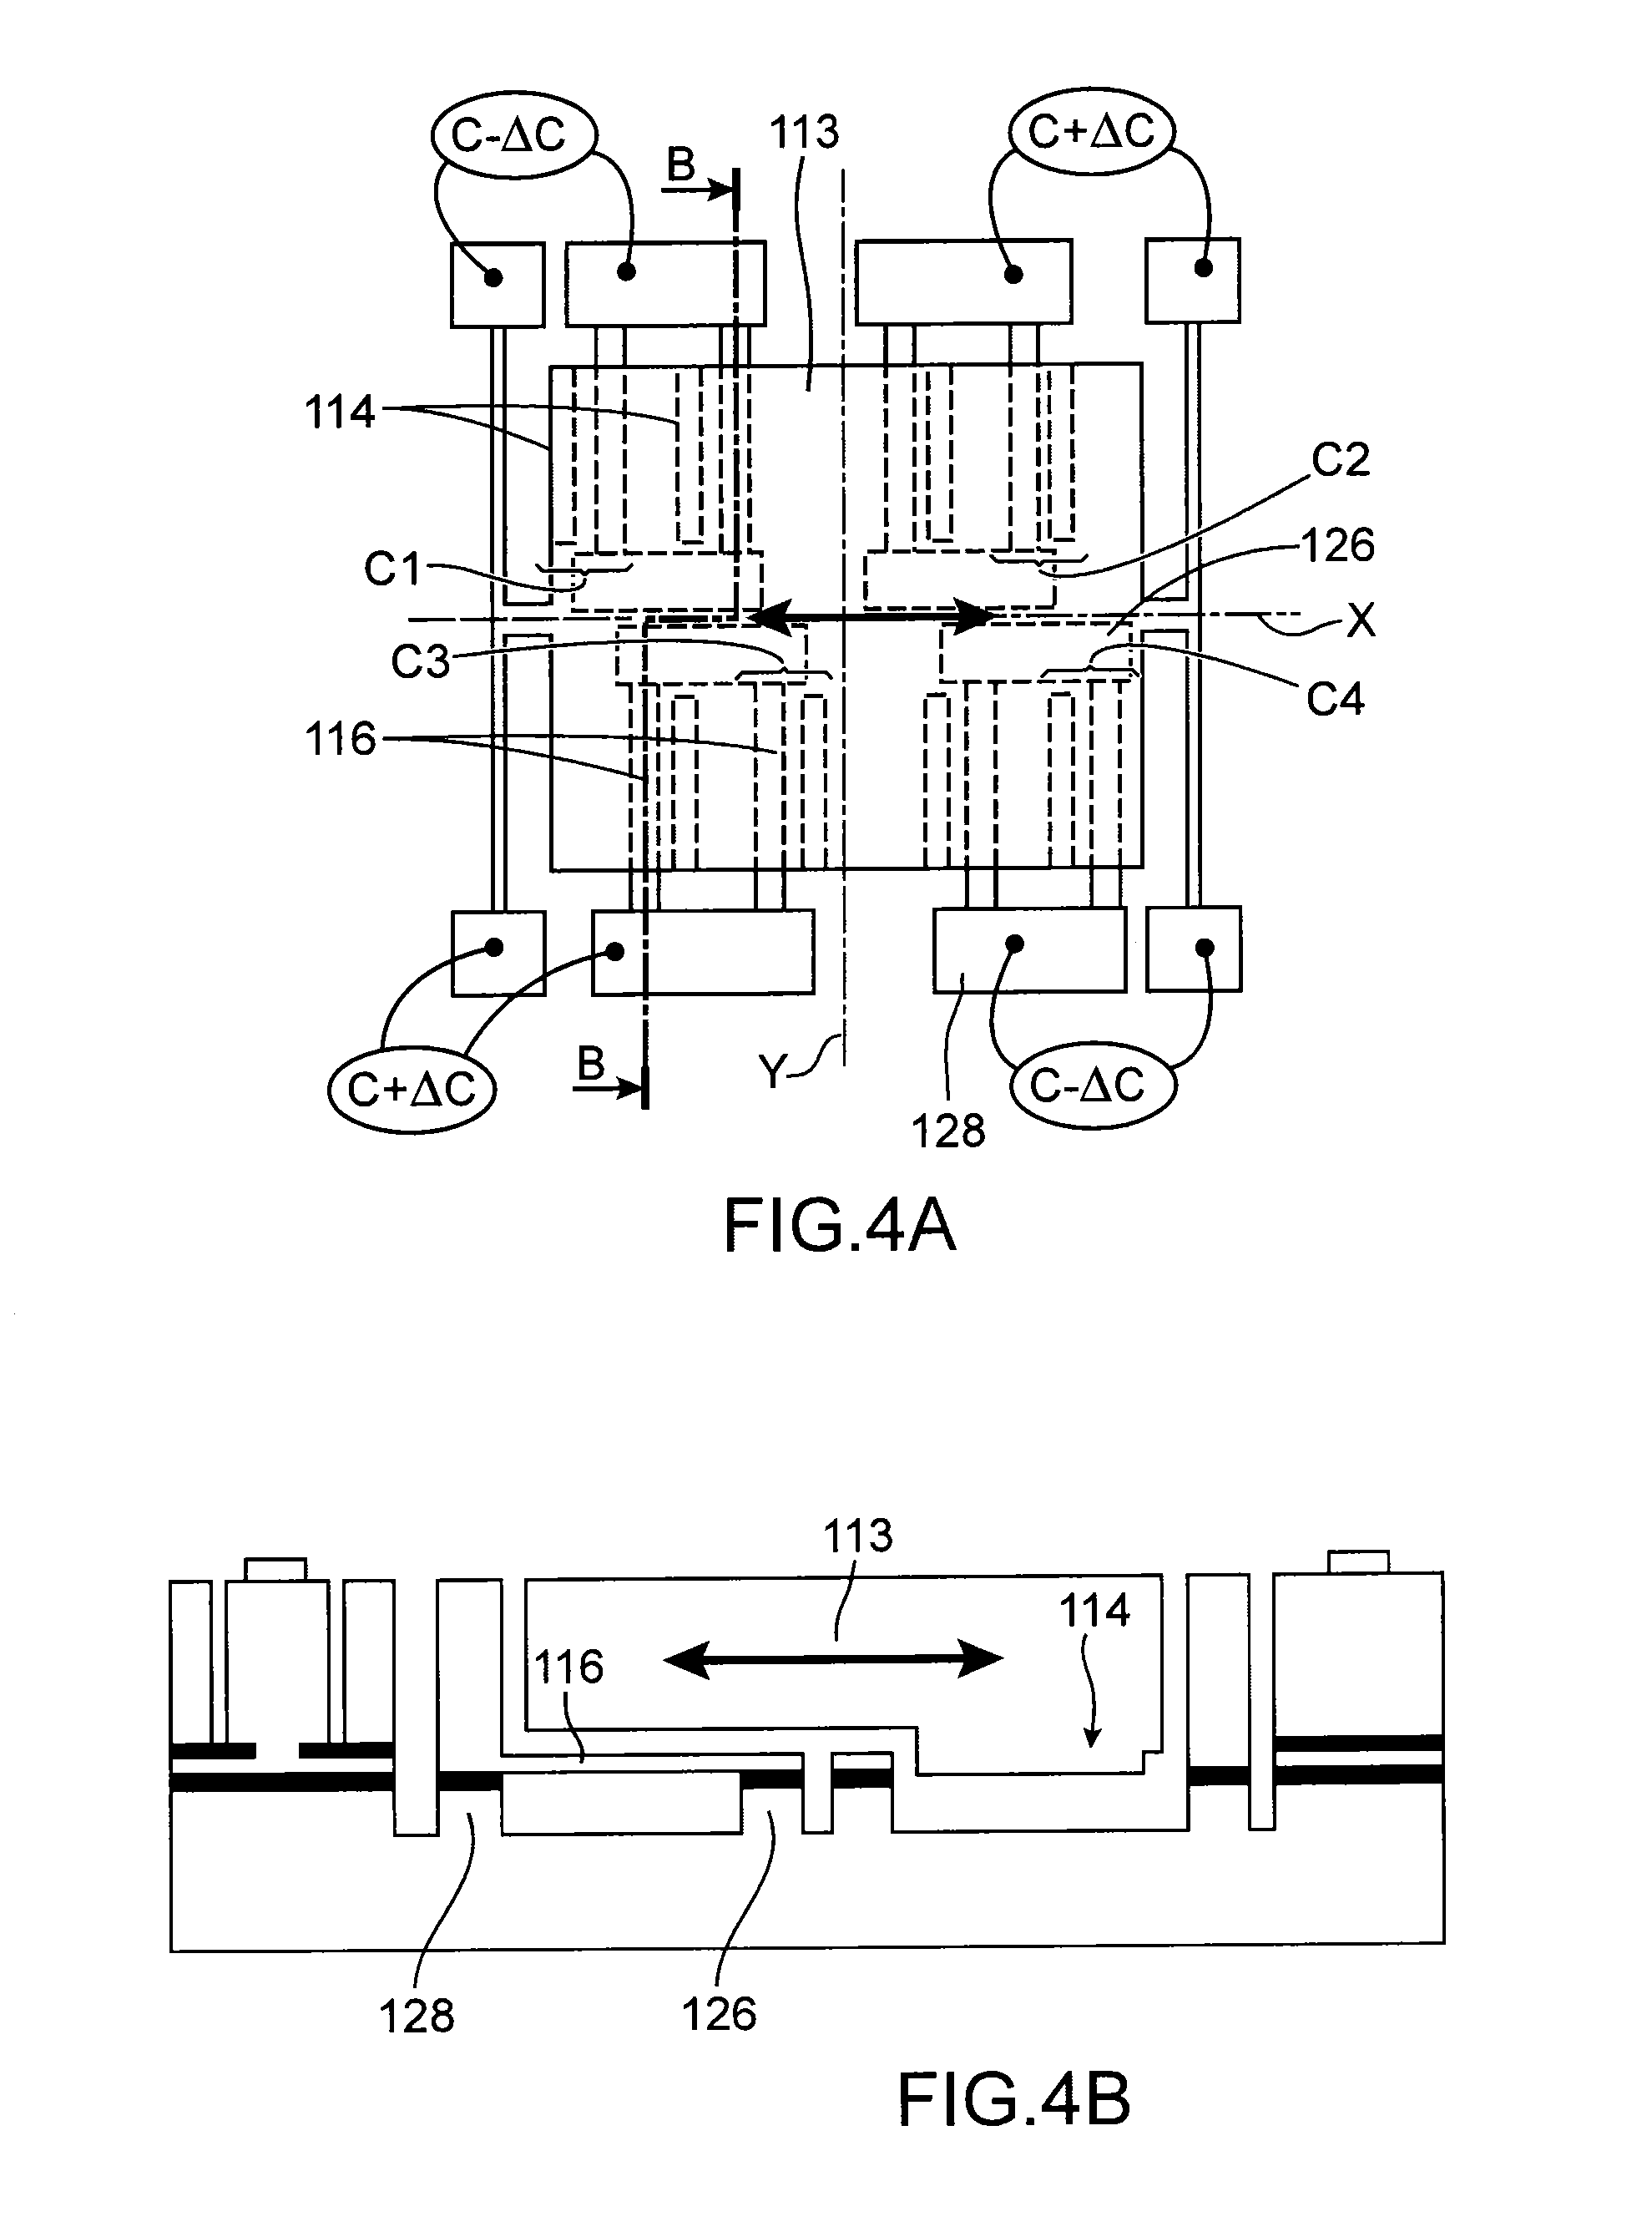 Capacitive microelectronic and/or nanoelectronic device with increased compactness